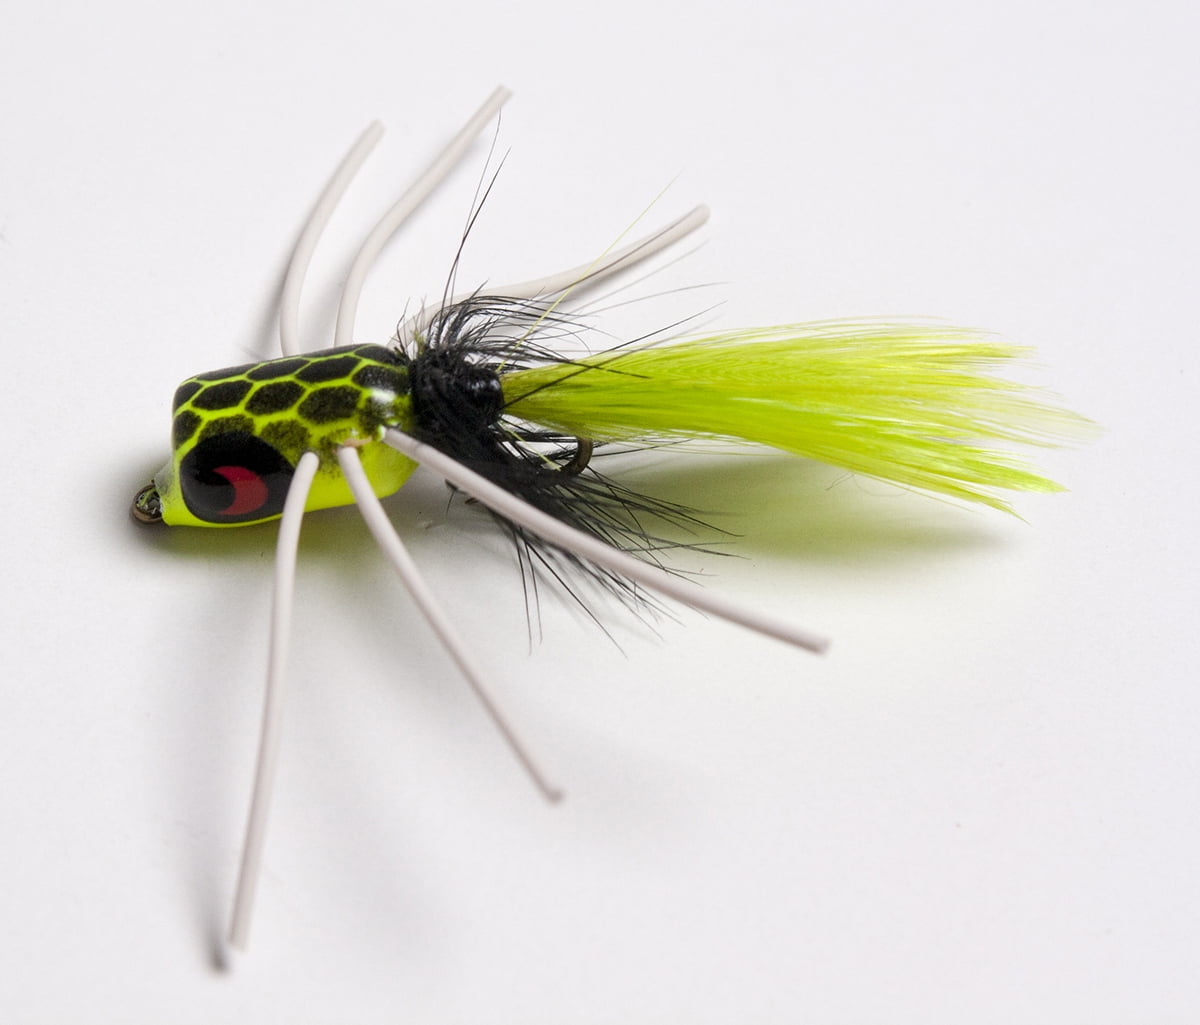 SIZE 10 FLY FISHING TROUT FLIES 3 X CHARTREUSE PEARL & WHITE CAT 